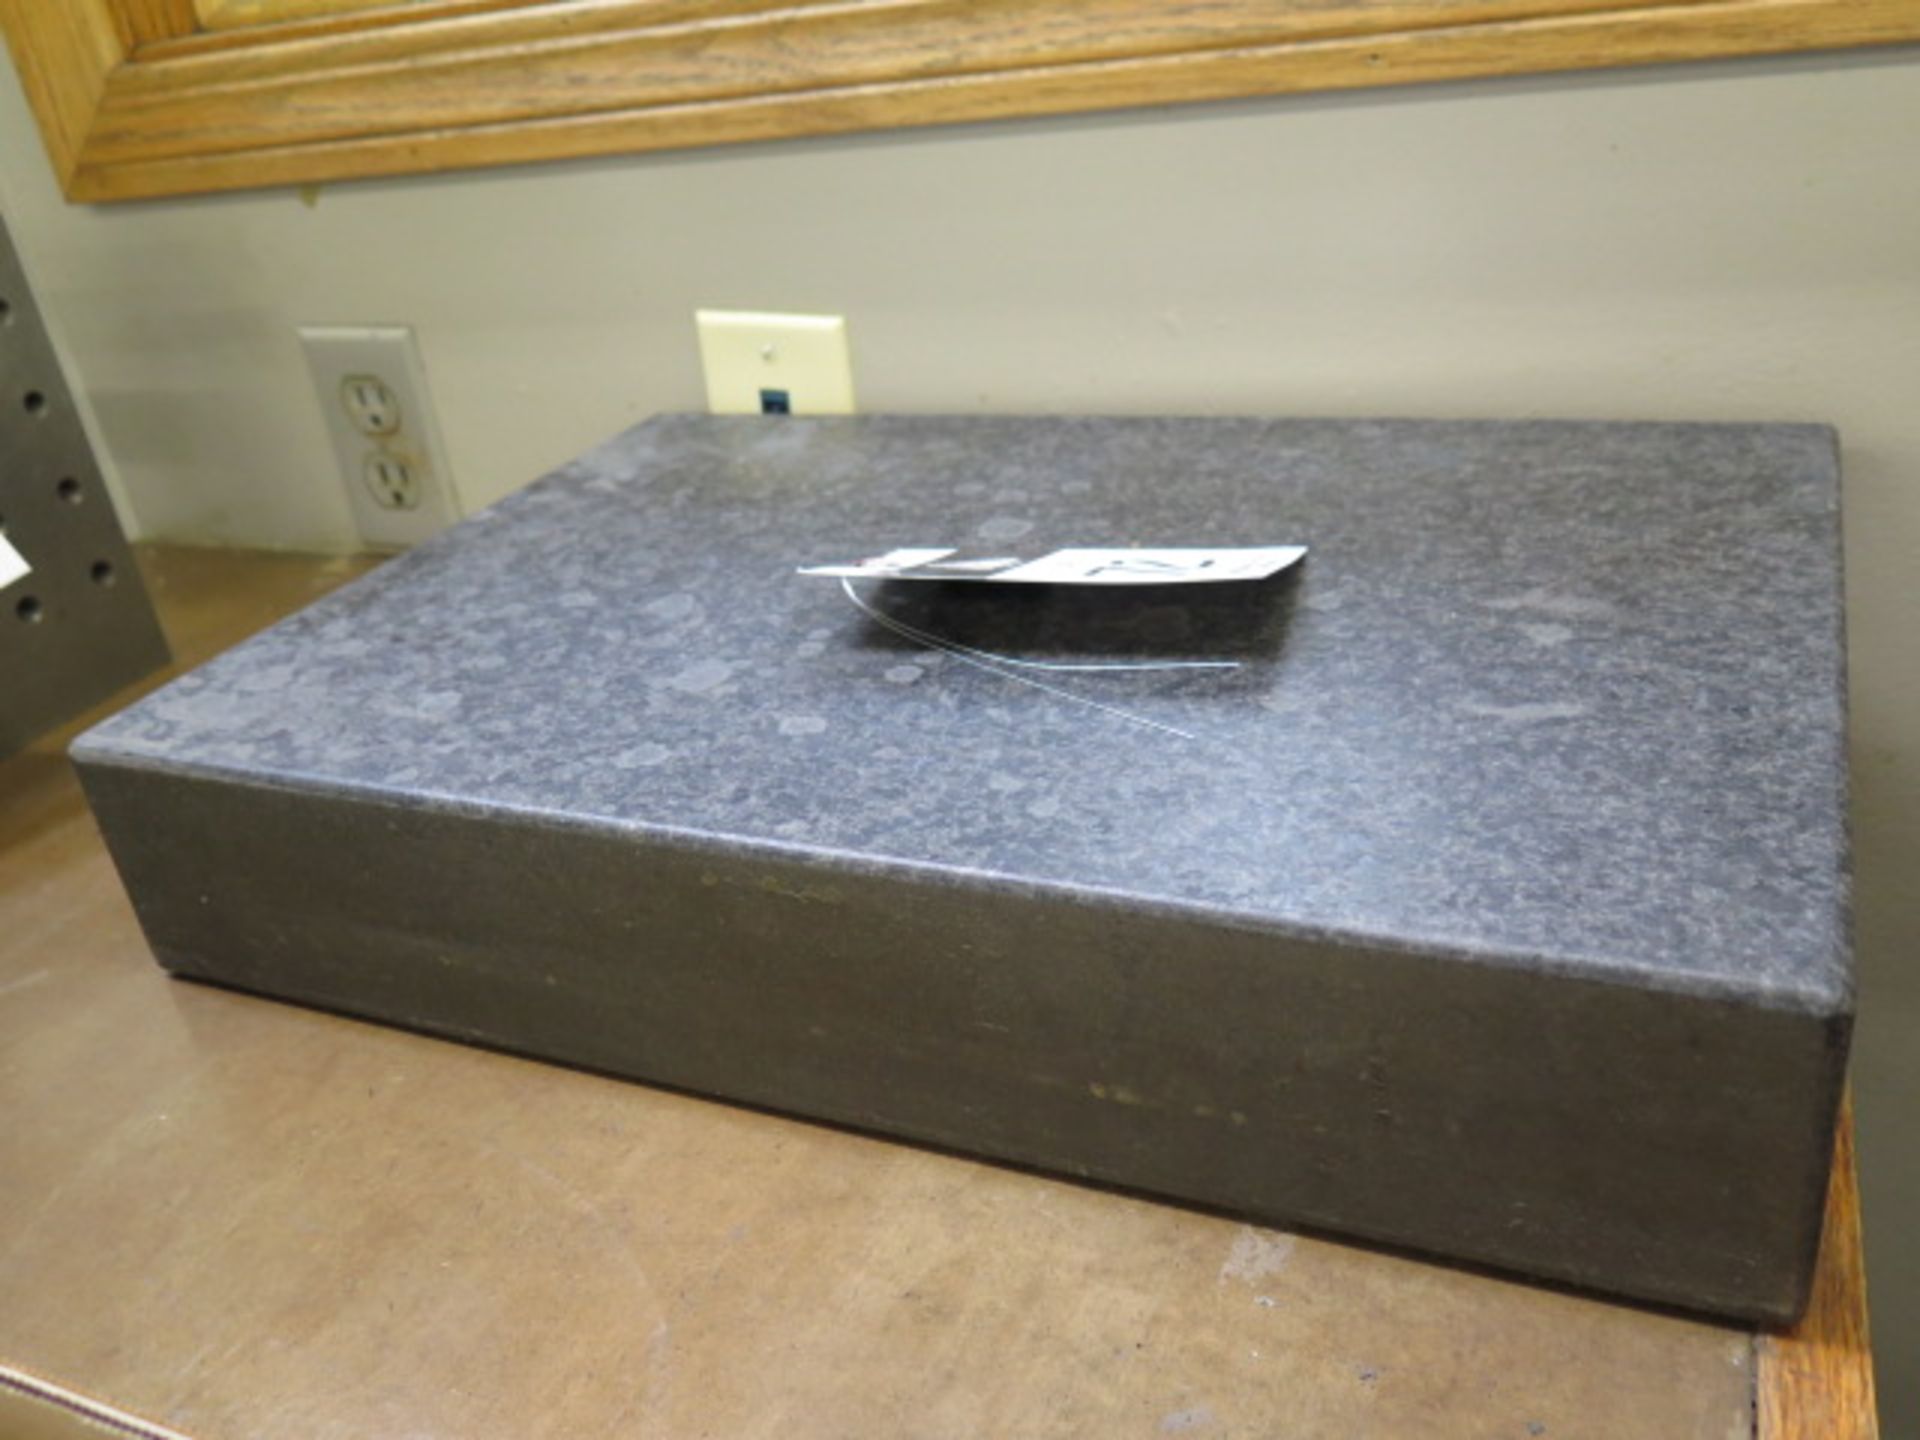 12" x 18" x 3" Granite Surface Plate (SOLD AS-IS - NO WARRANTY) - Image 2 of 3